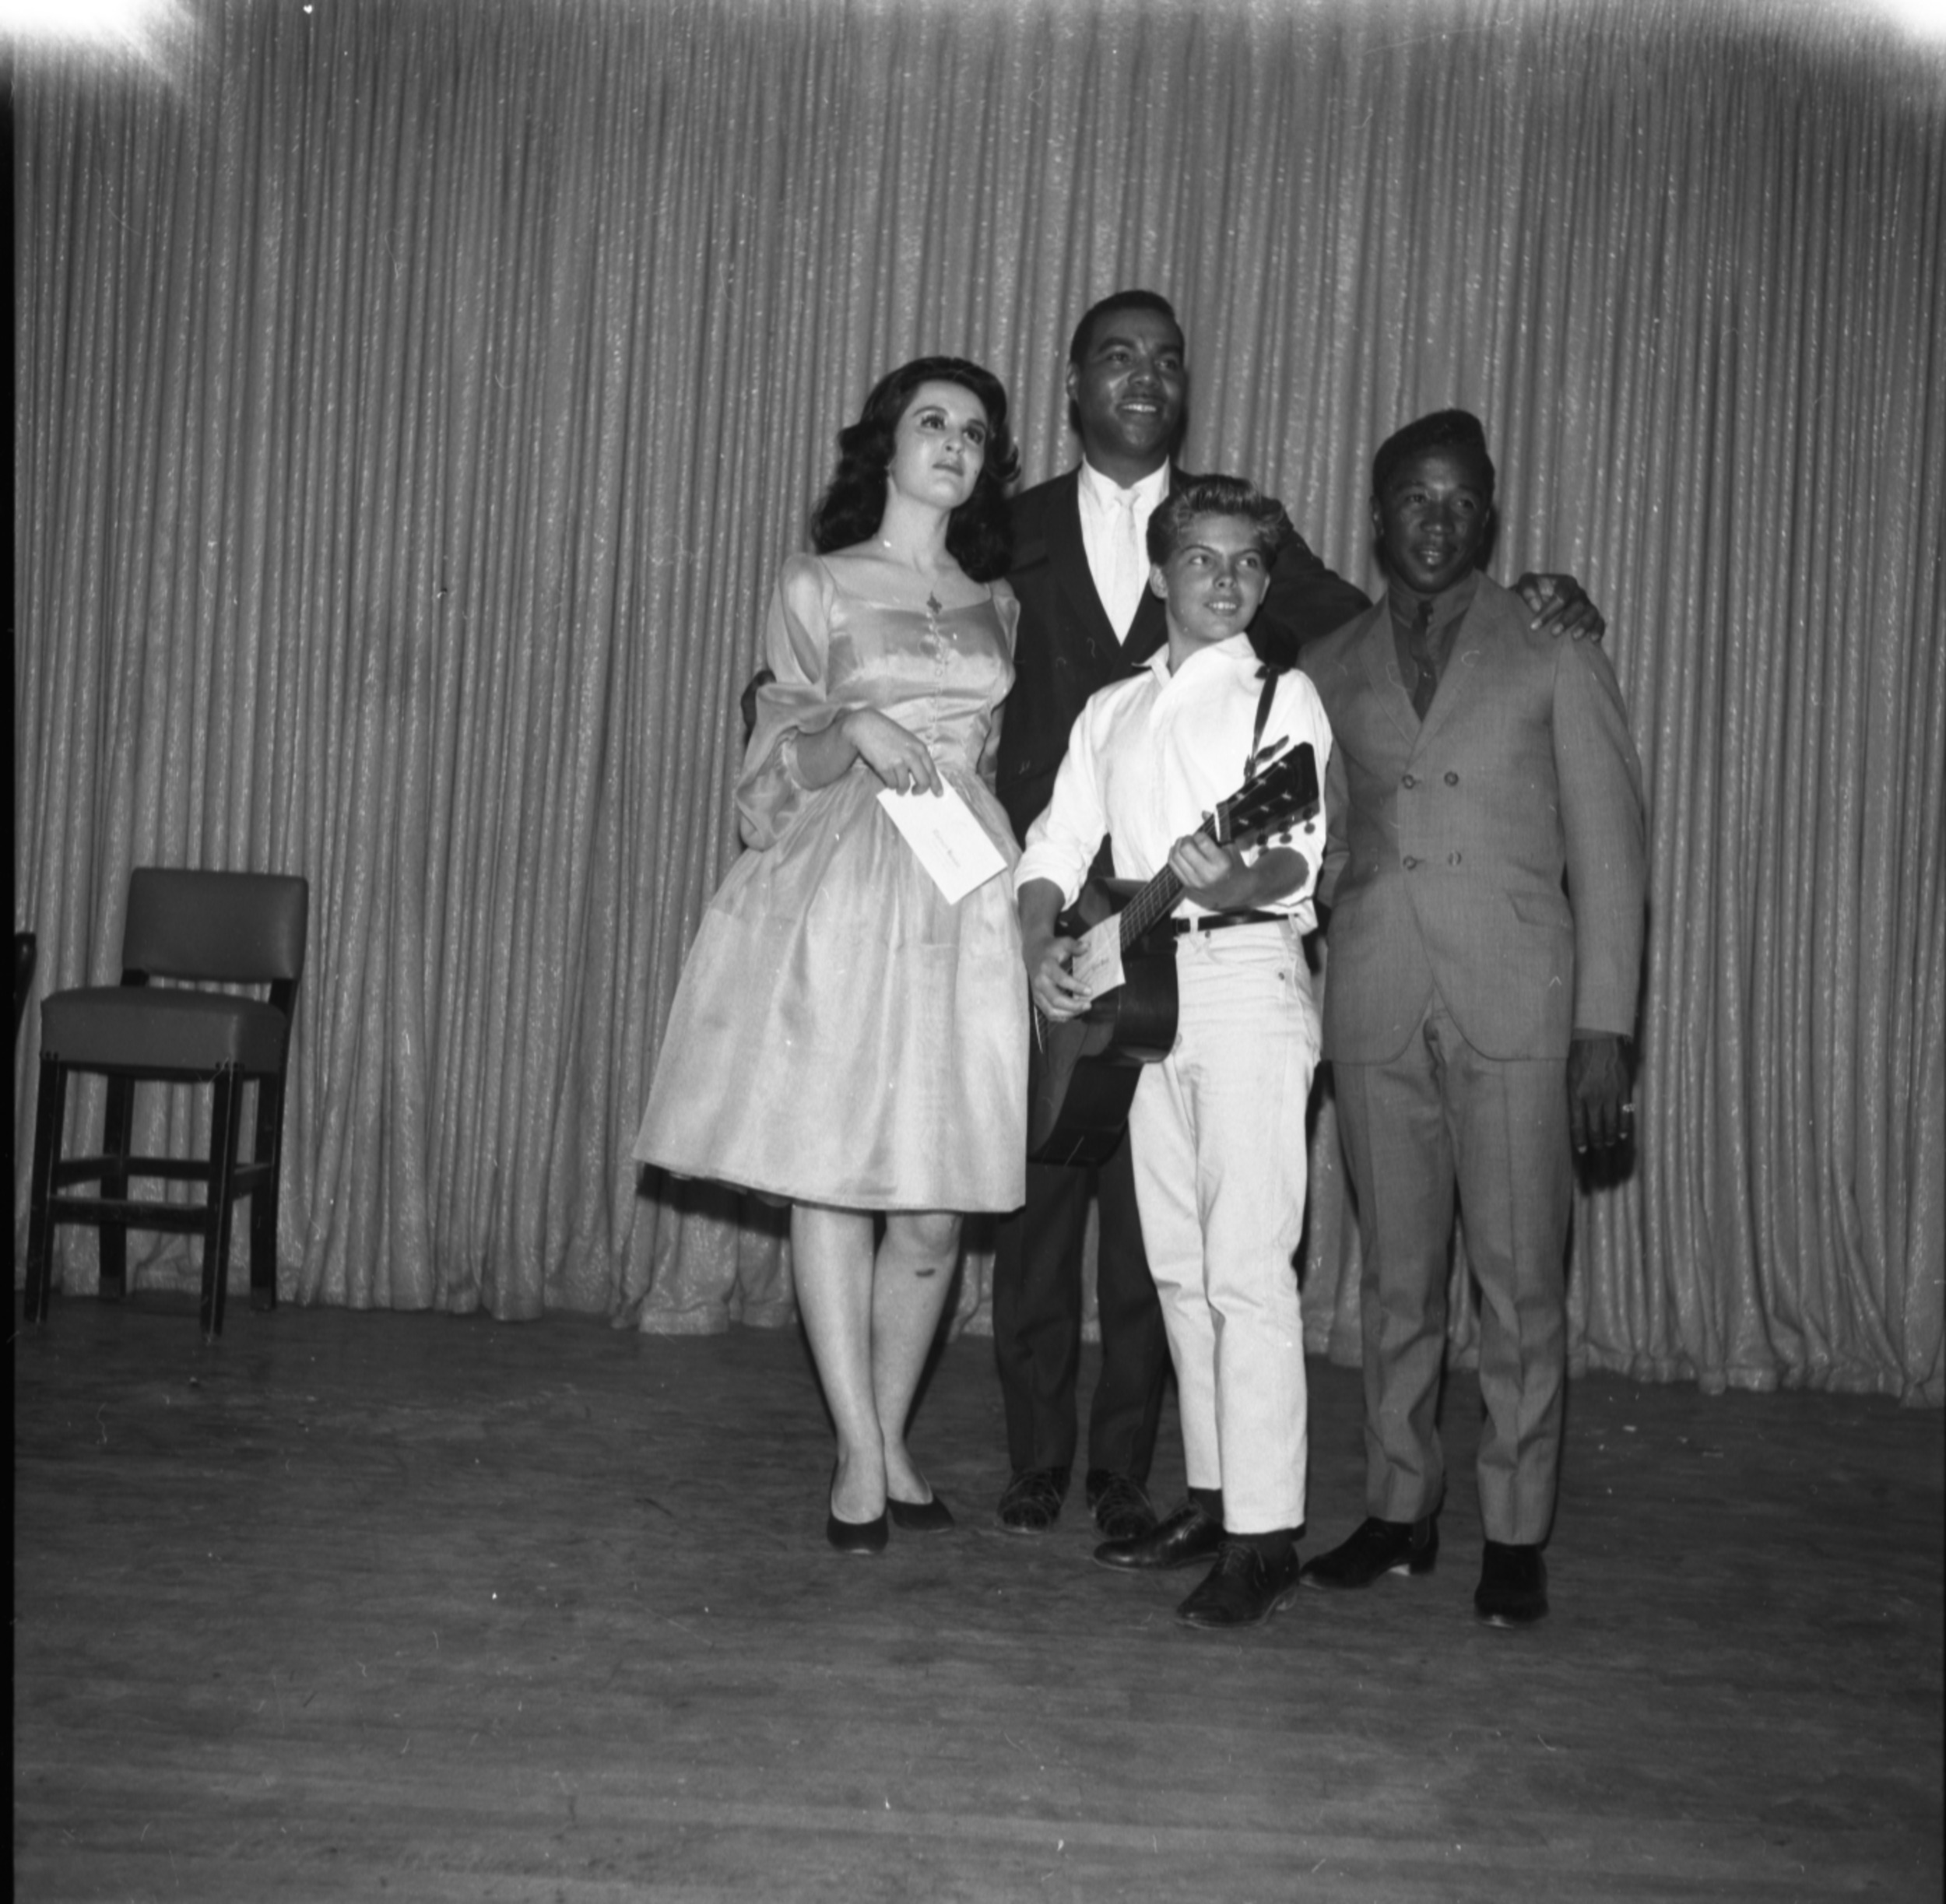 Carver House Talent Contest, May 9, 1962, Image 04